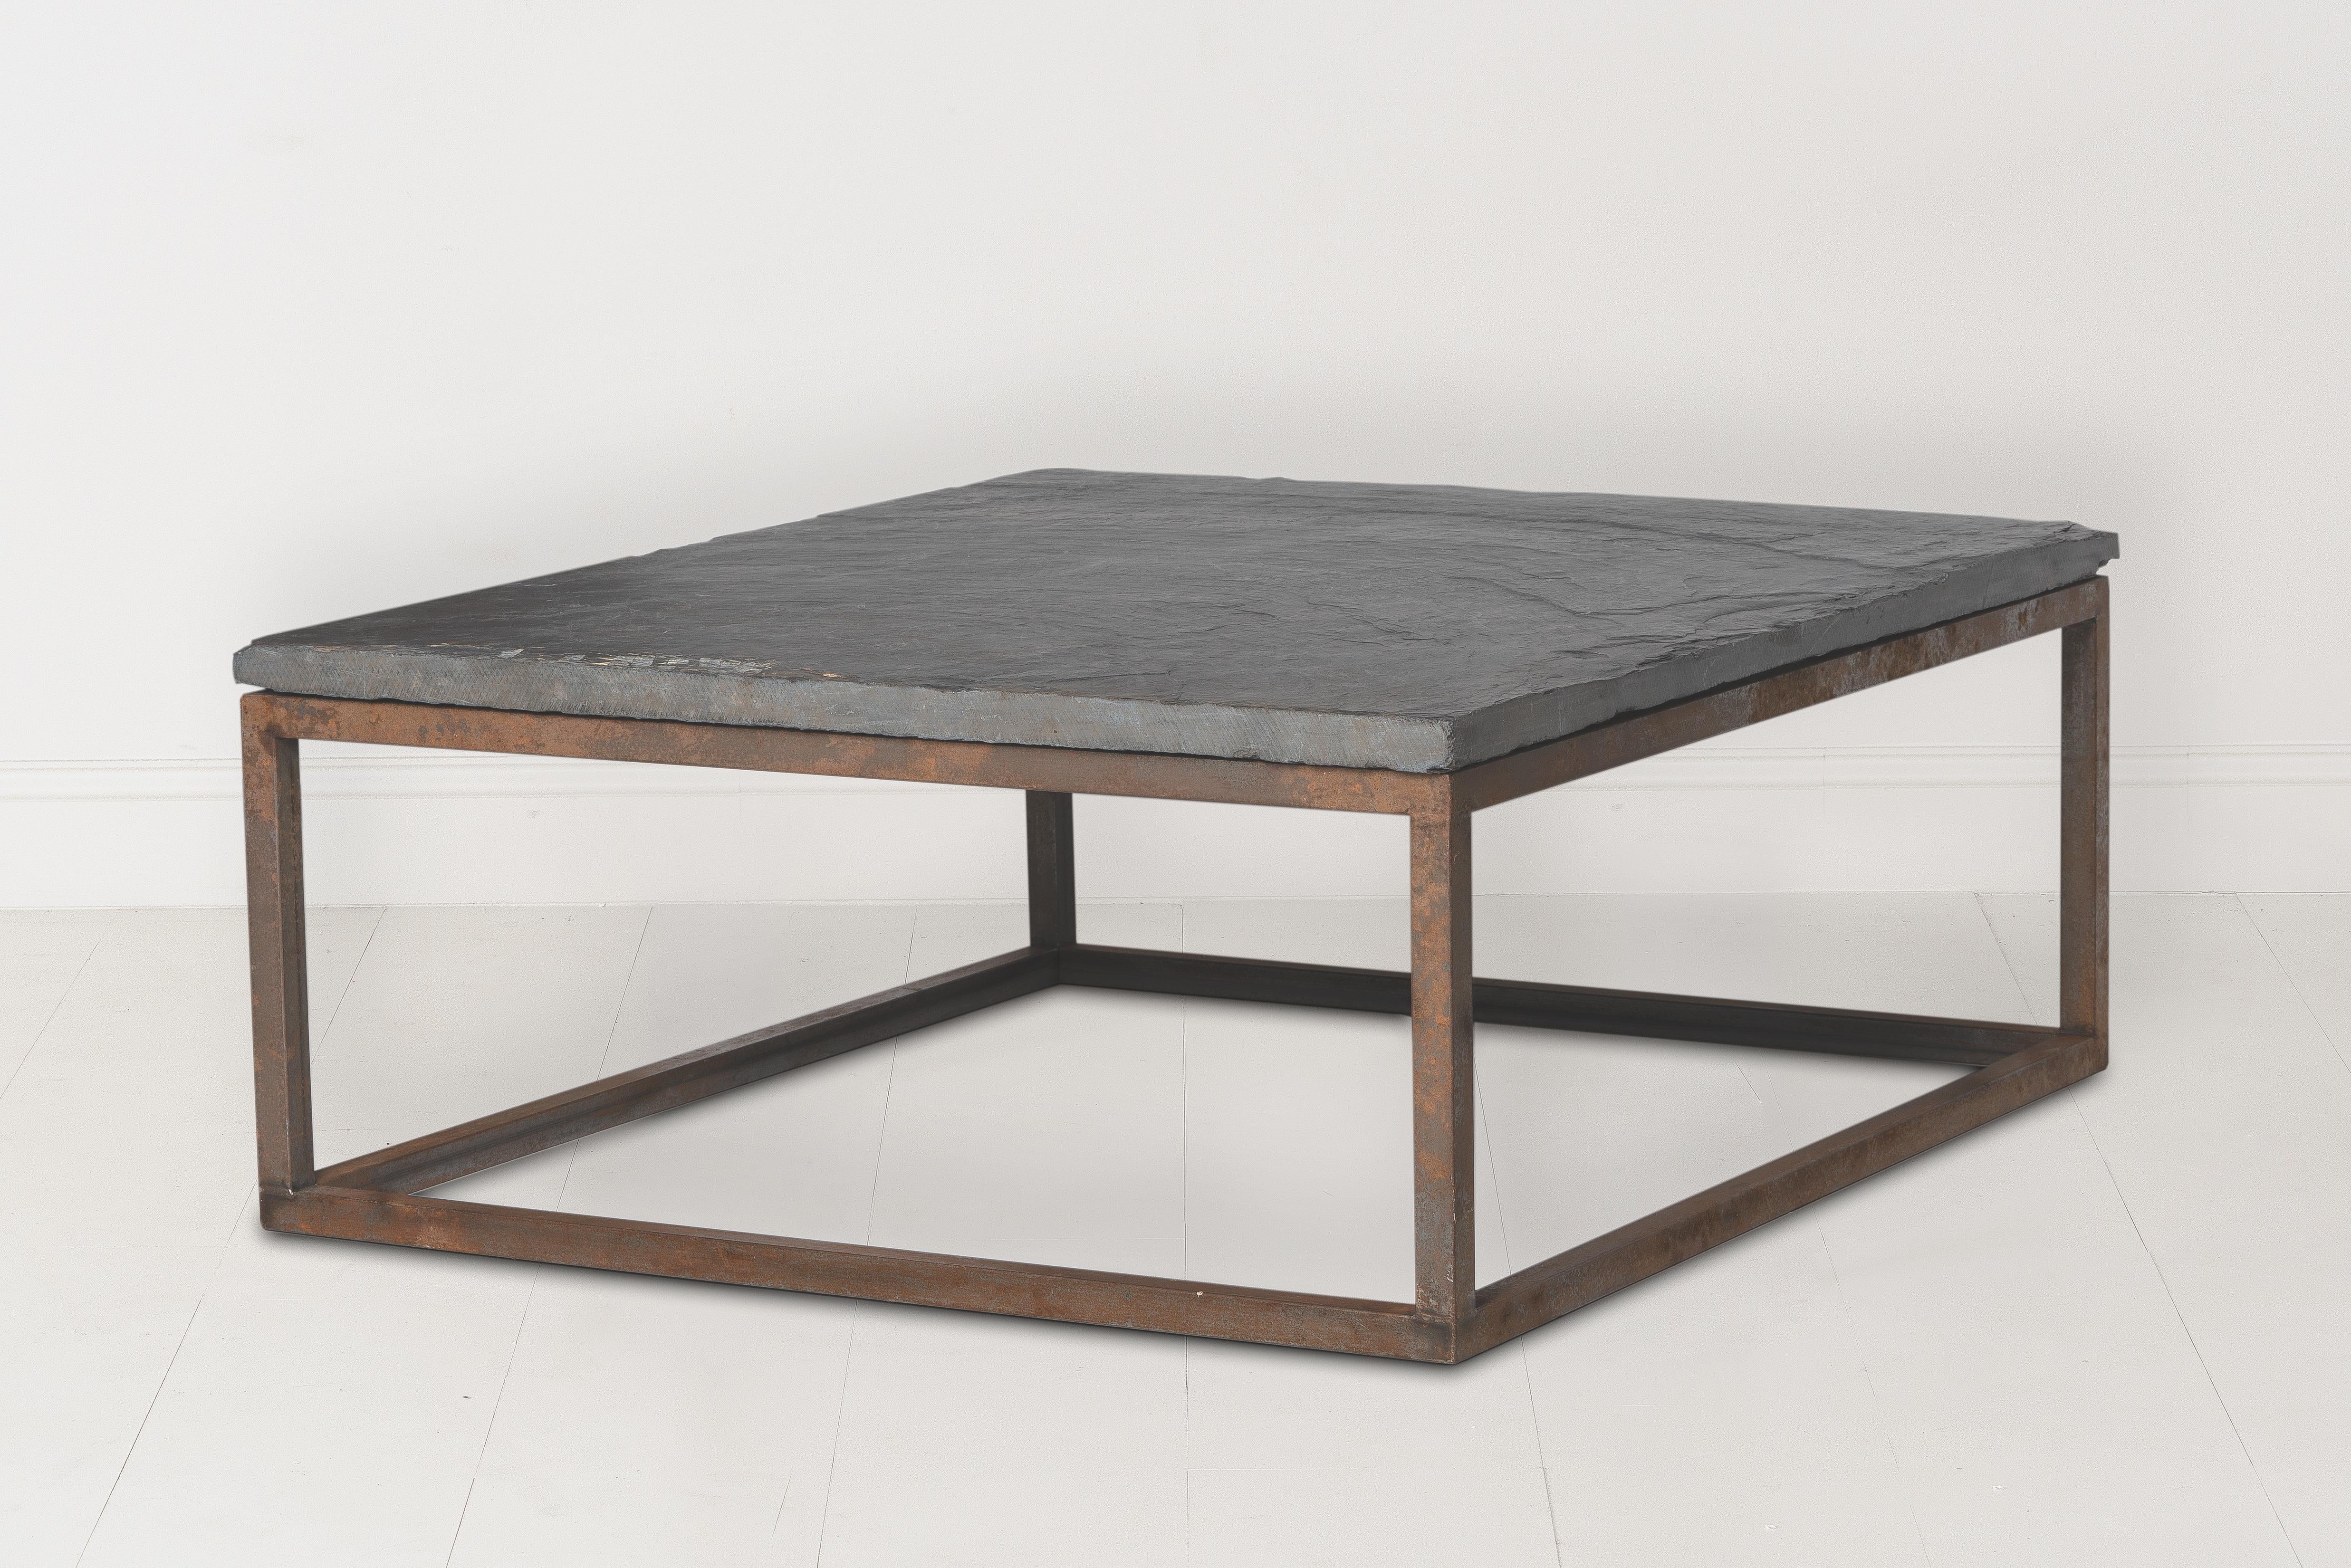 An unusually thick piece of circa 1920s Belgian slate sits atop a custom iron coffee table base. Found in Belgium. The slate top is 2.44 inches thick.